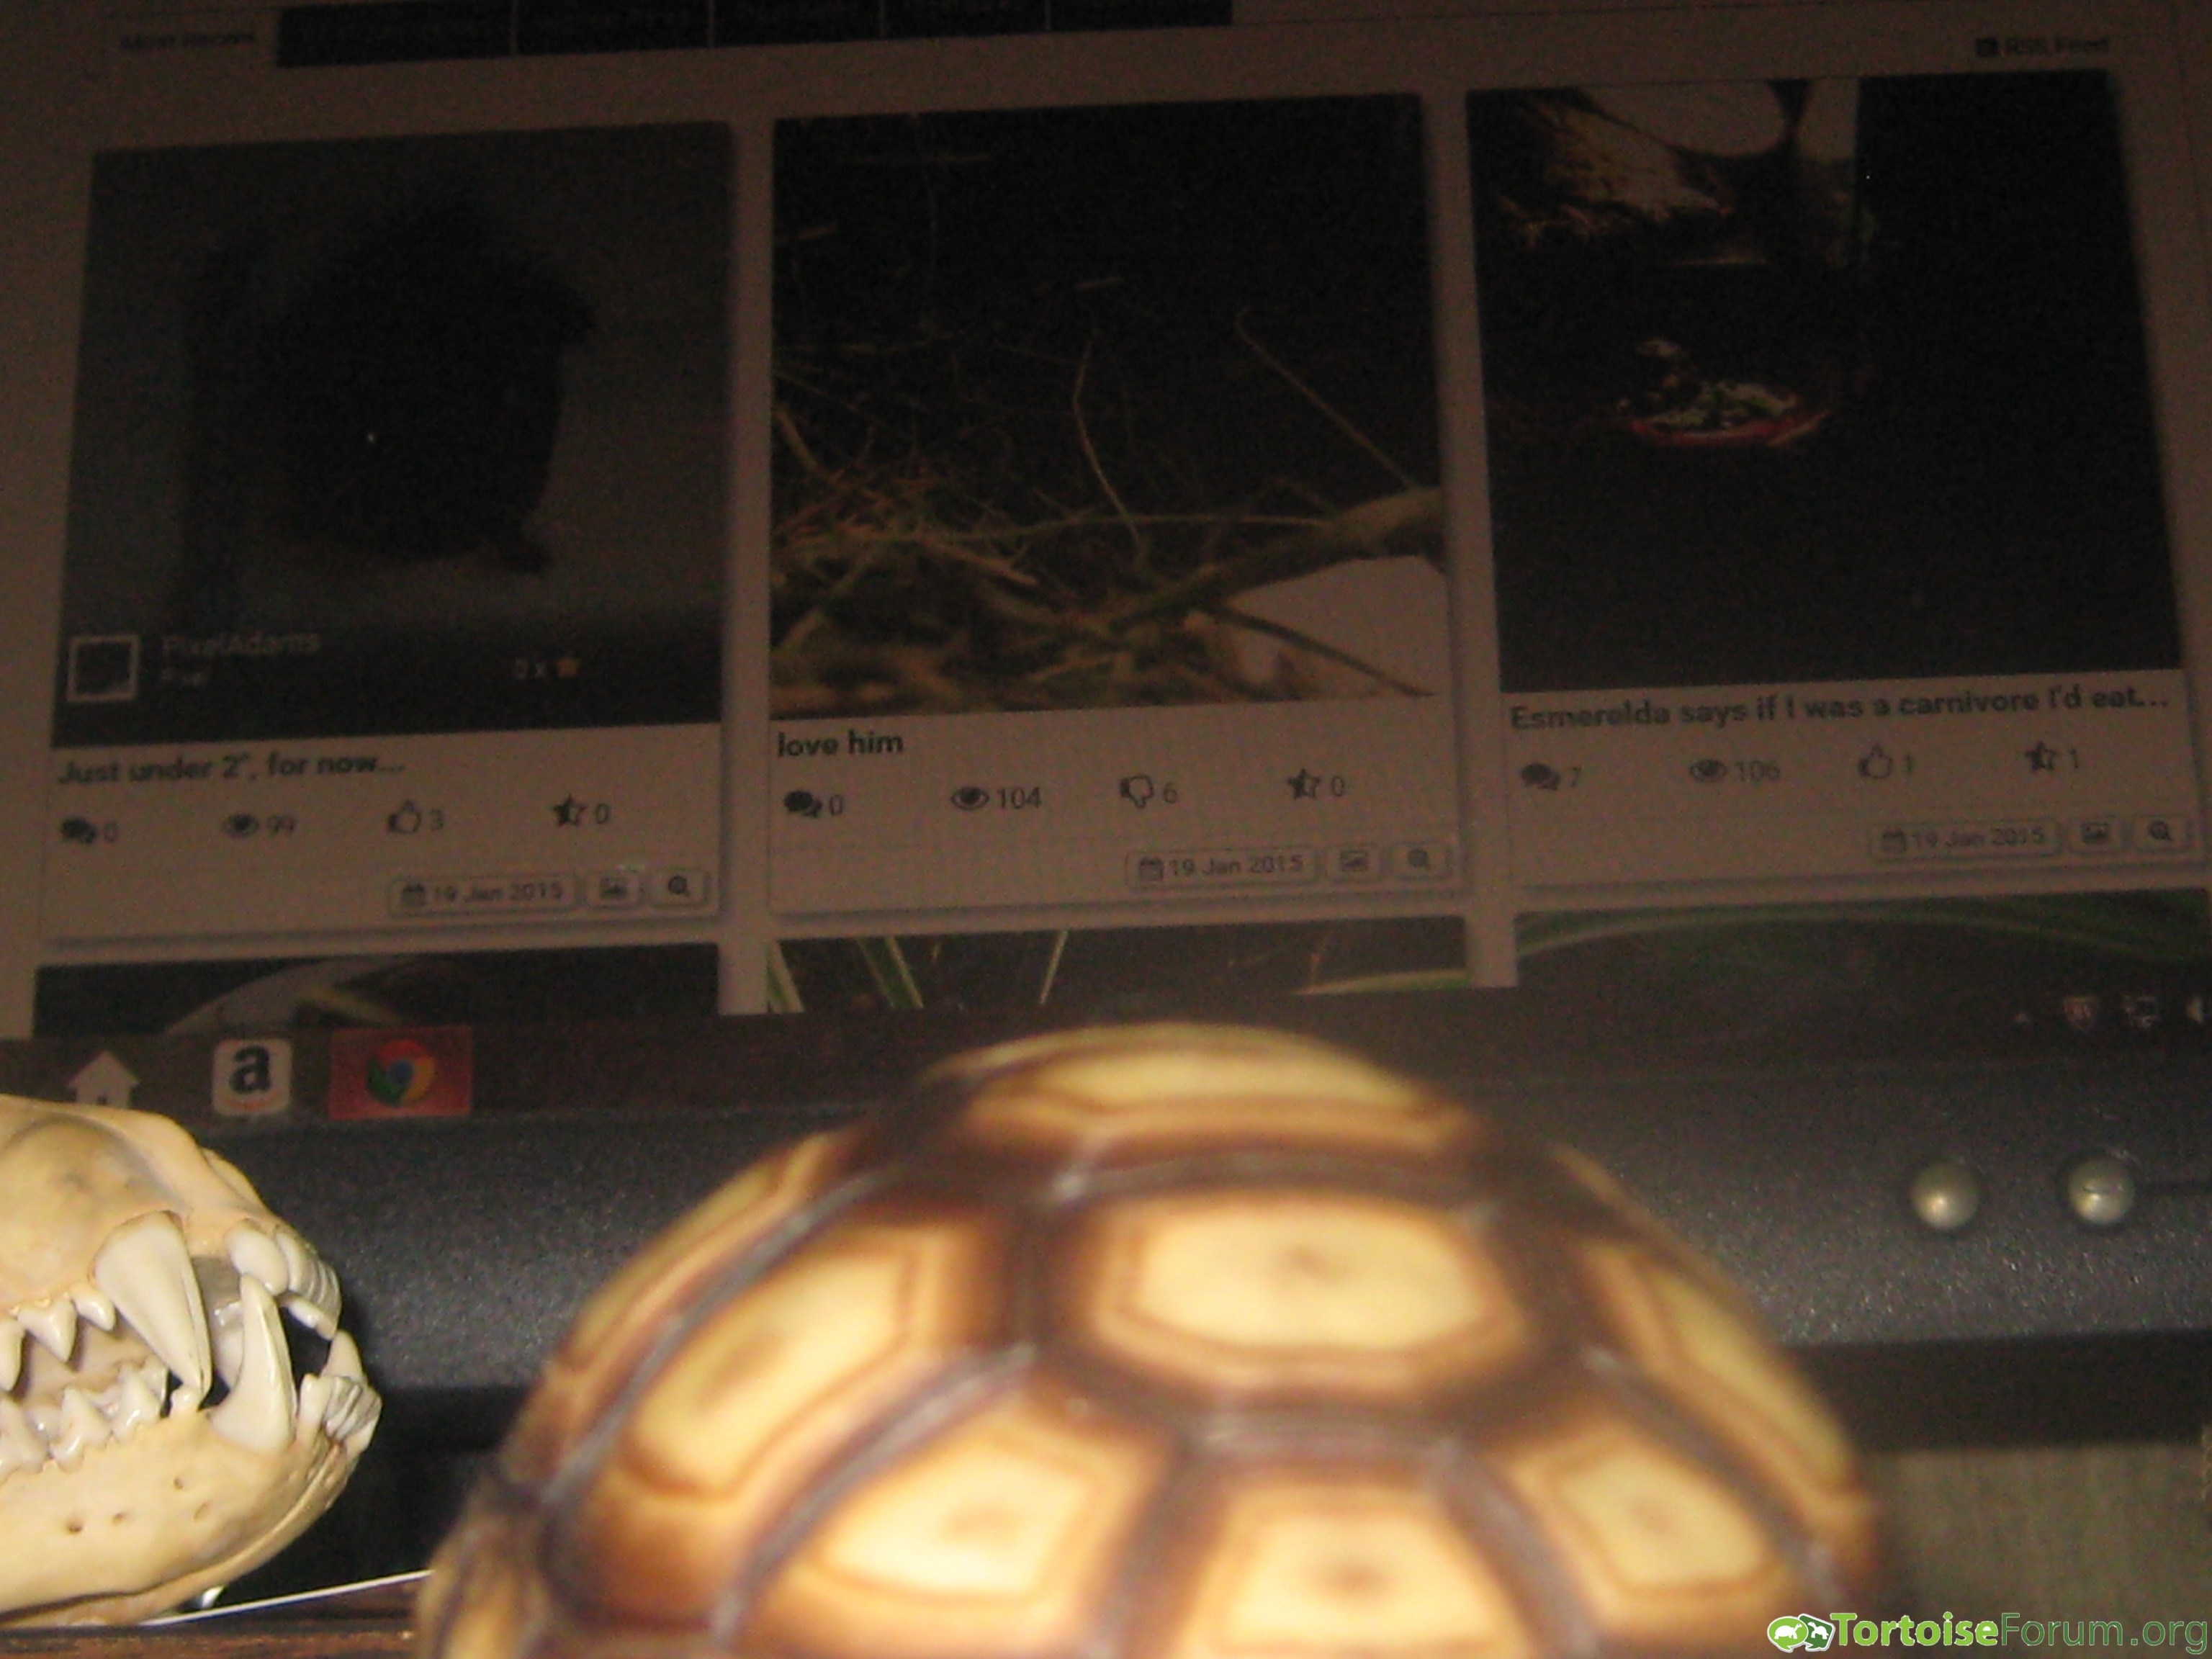 Why you look at other tortoises?